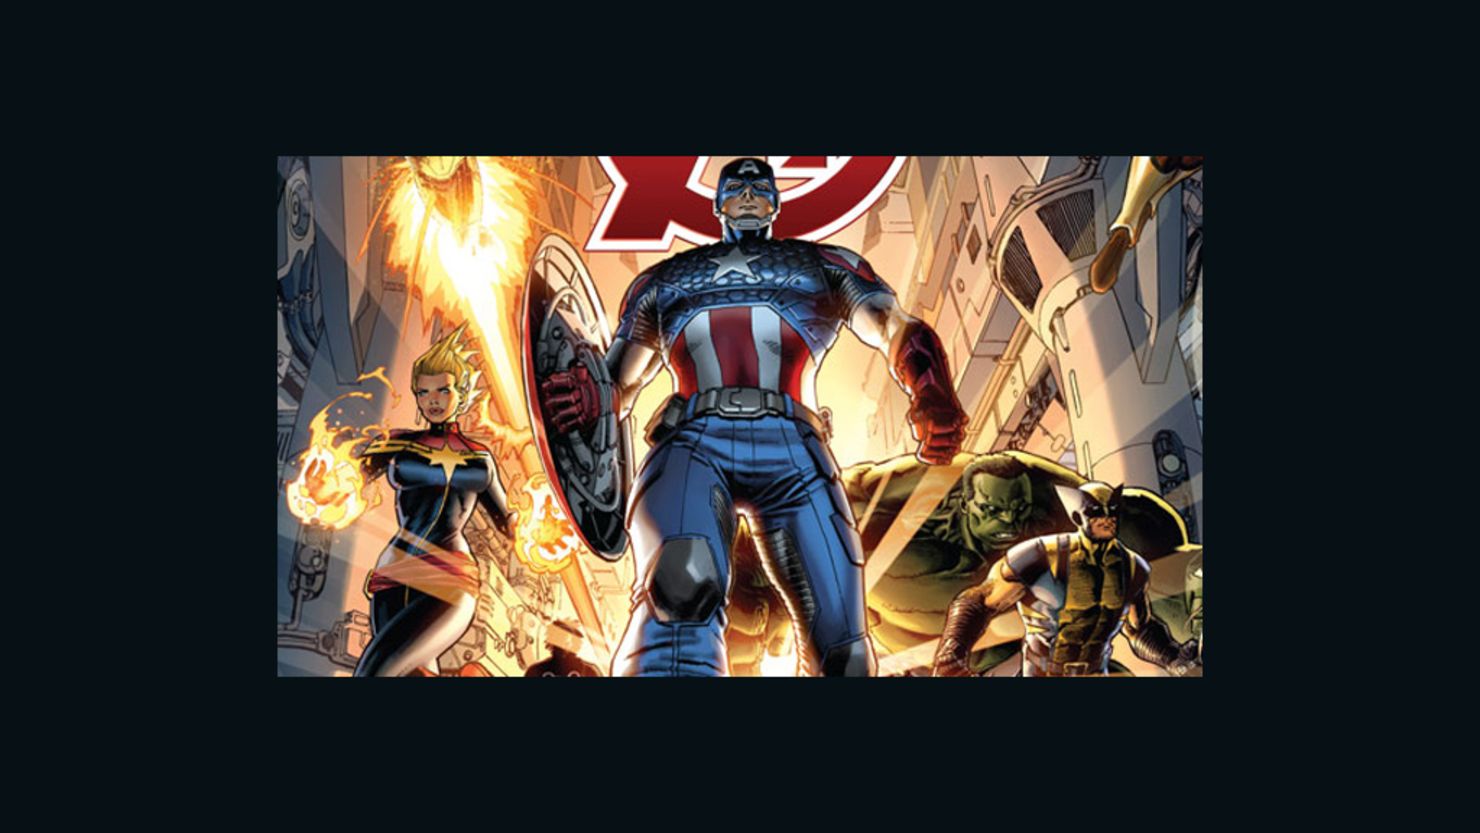 Marvel Entertainment offered 700 No. 1 issues, including 2012's "Avengers," free for digital download.